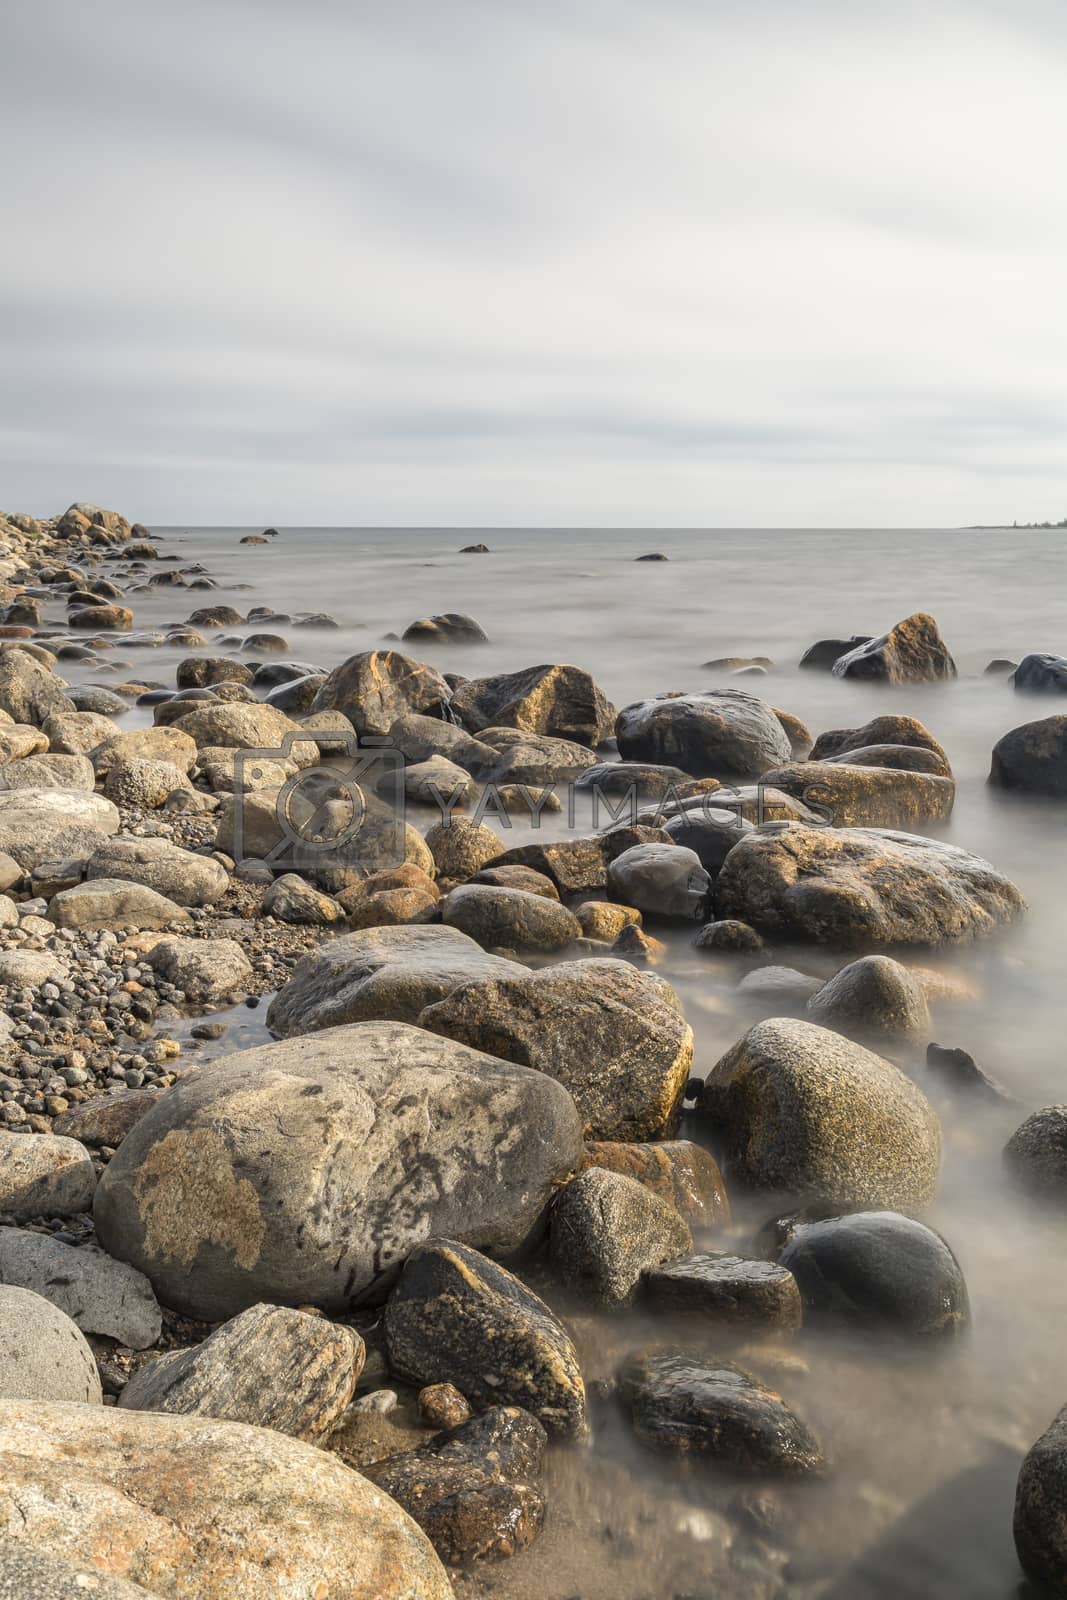 Royalty free image of Rocky Shoreline over Ocean by Emmoth